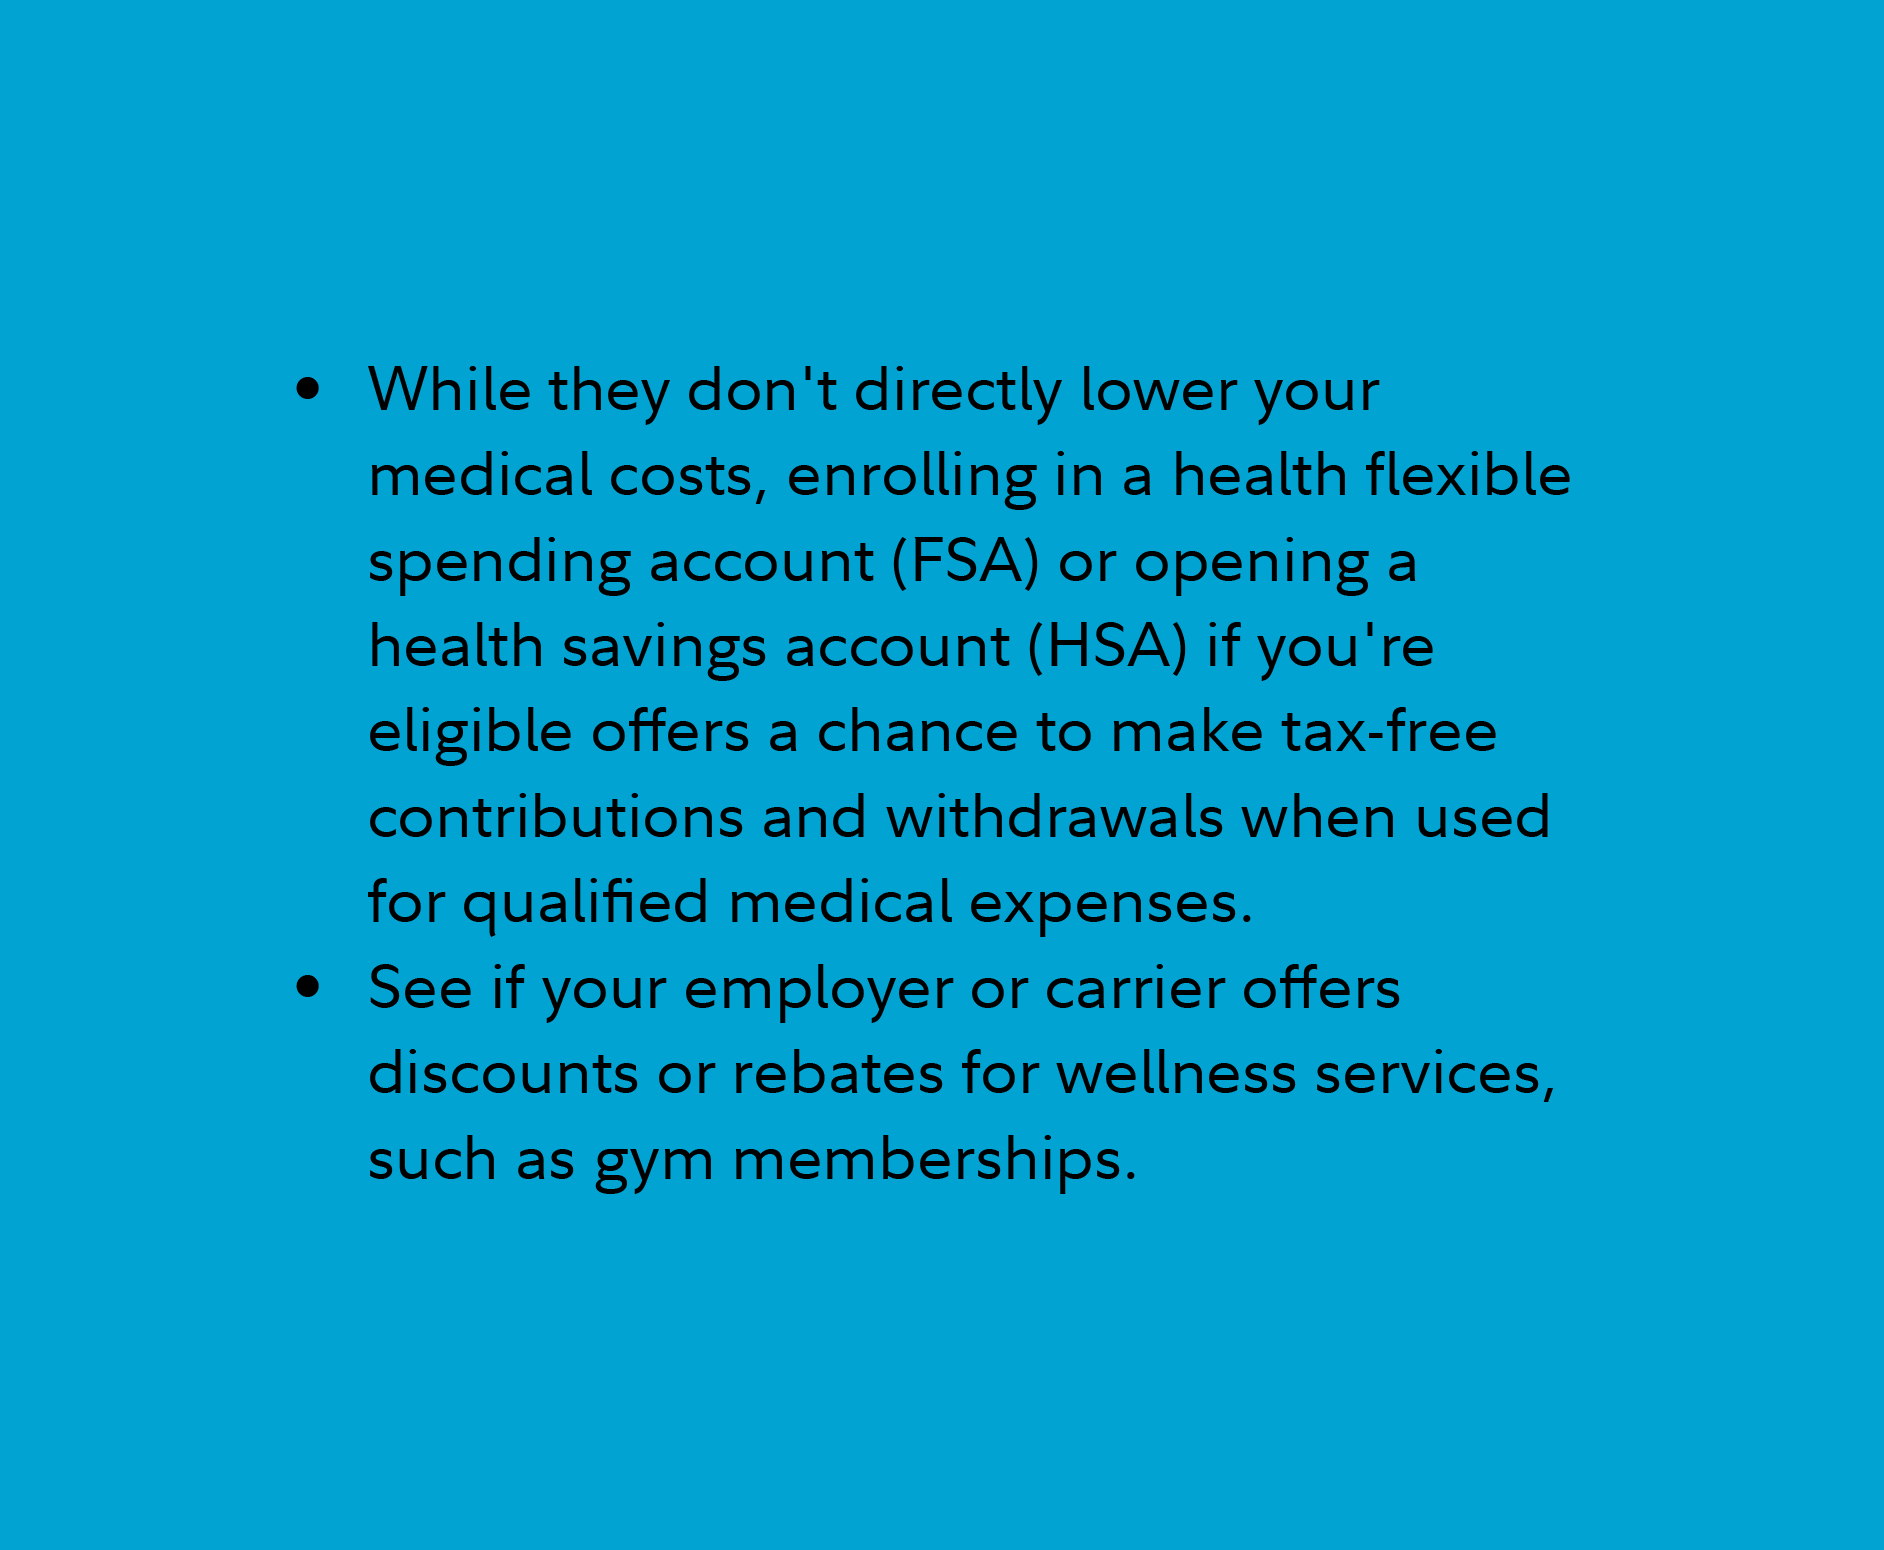 While they don't directly lower your medical costs, enrolling in a health flexible spending account (FSA) or opening a health savings account (HSA) if you're eligible offers a chance to make tax-free contributions and withdrawals when used for qualified medical expenses.  See if your employer or carrier offers discounts or rebates for wellness services, such as gym memberships.